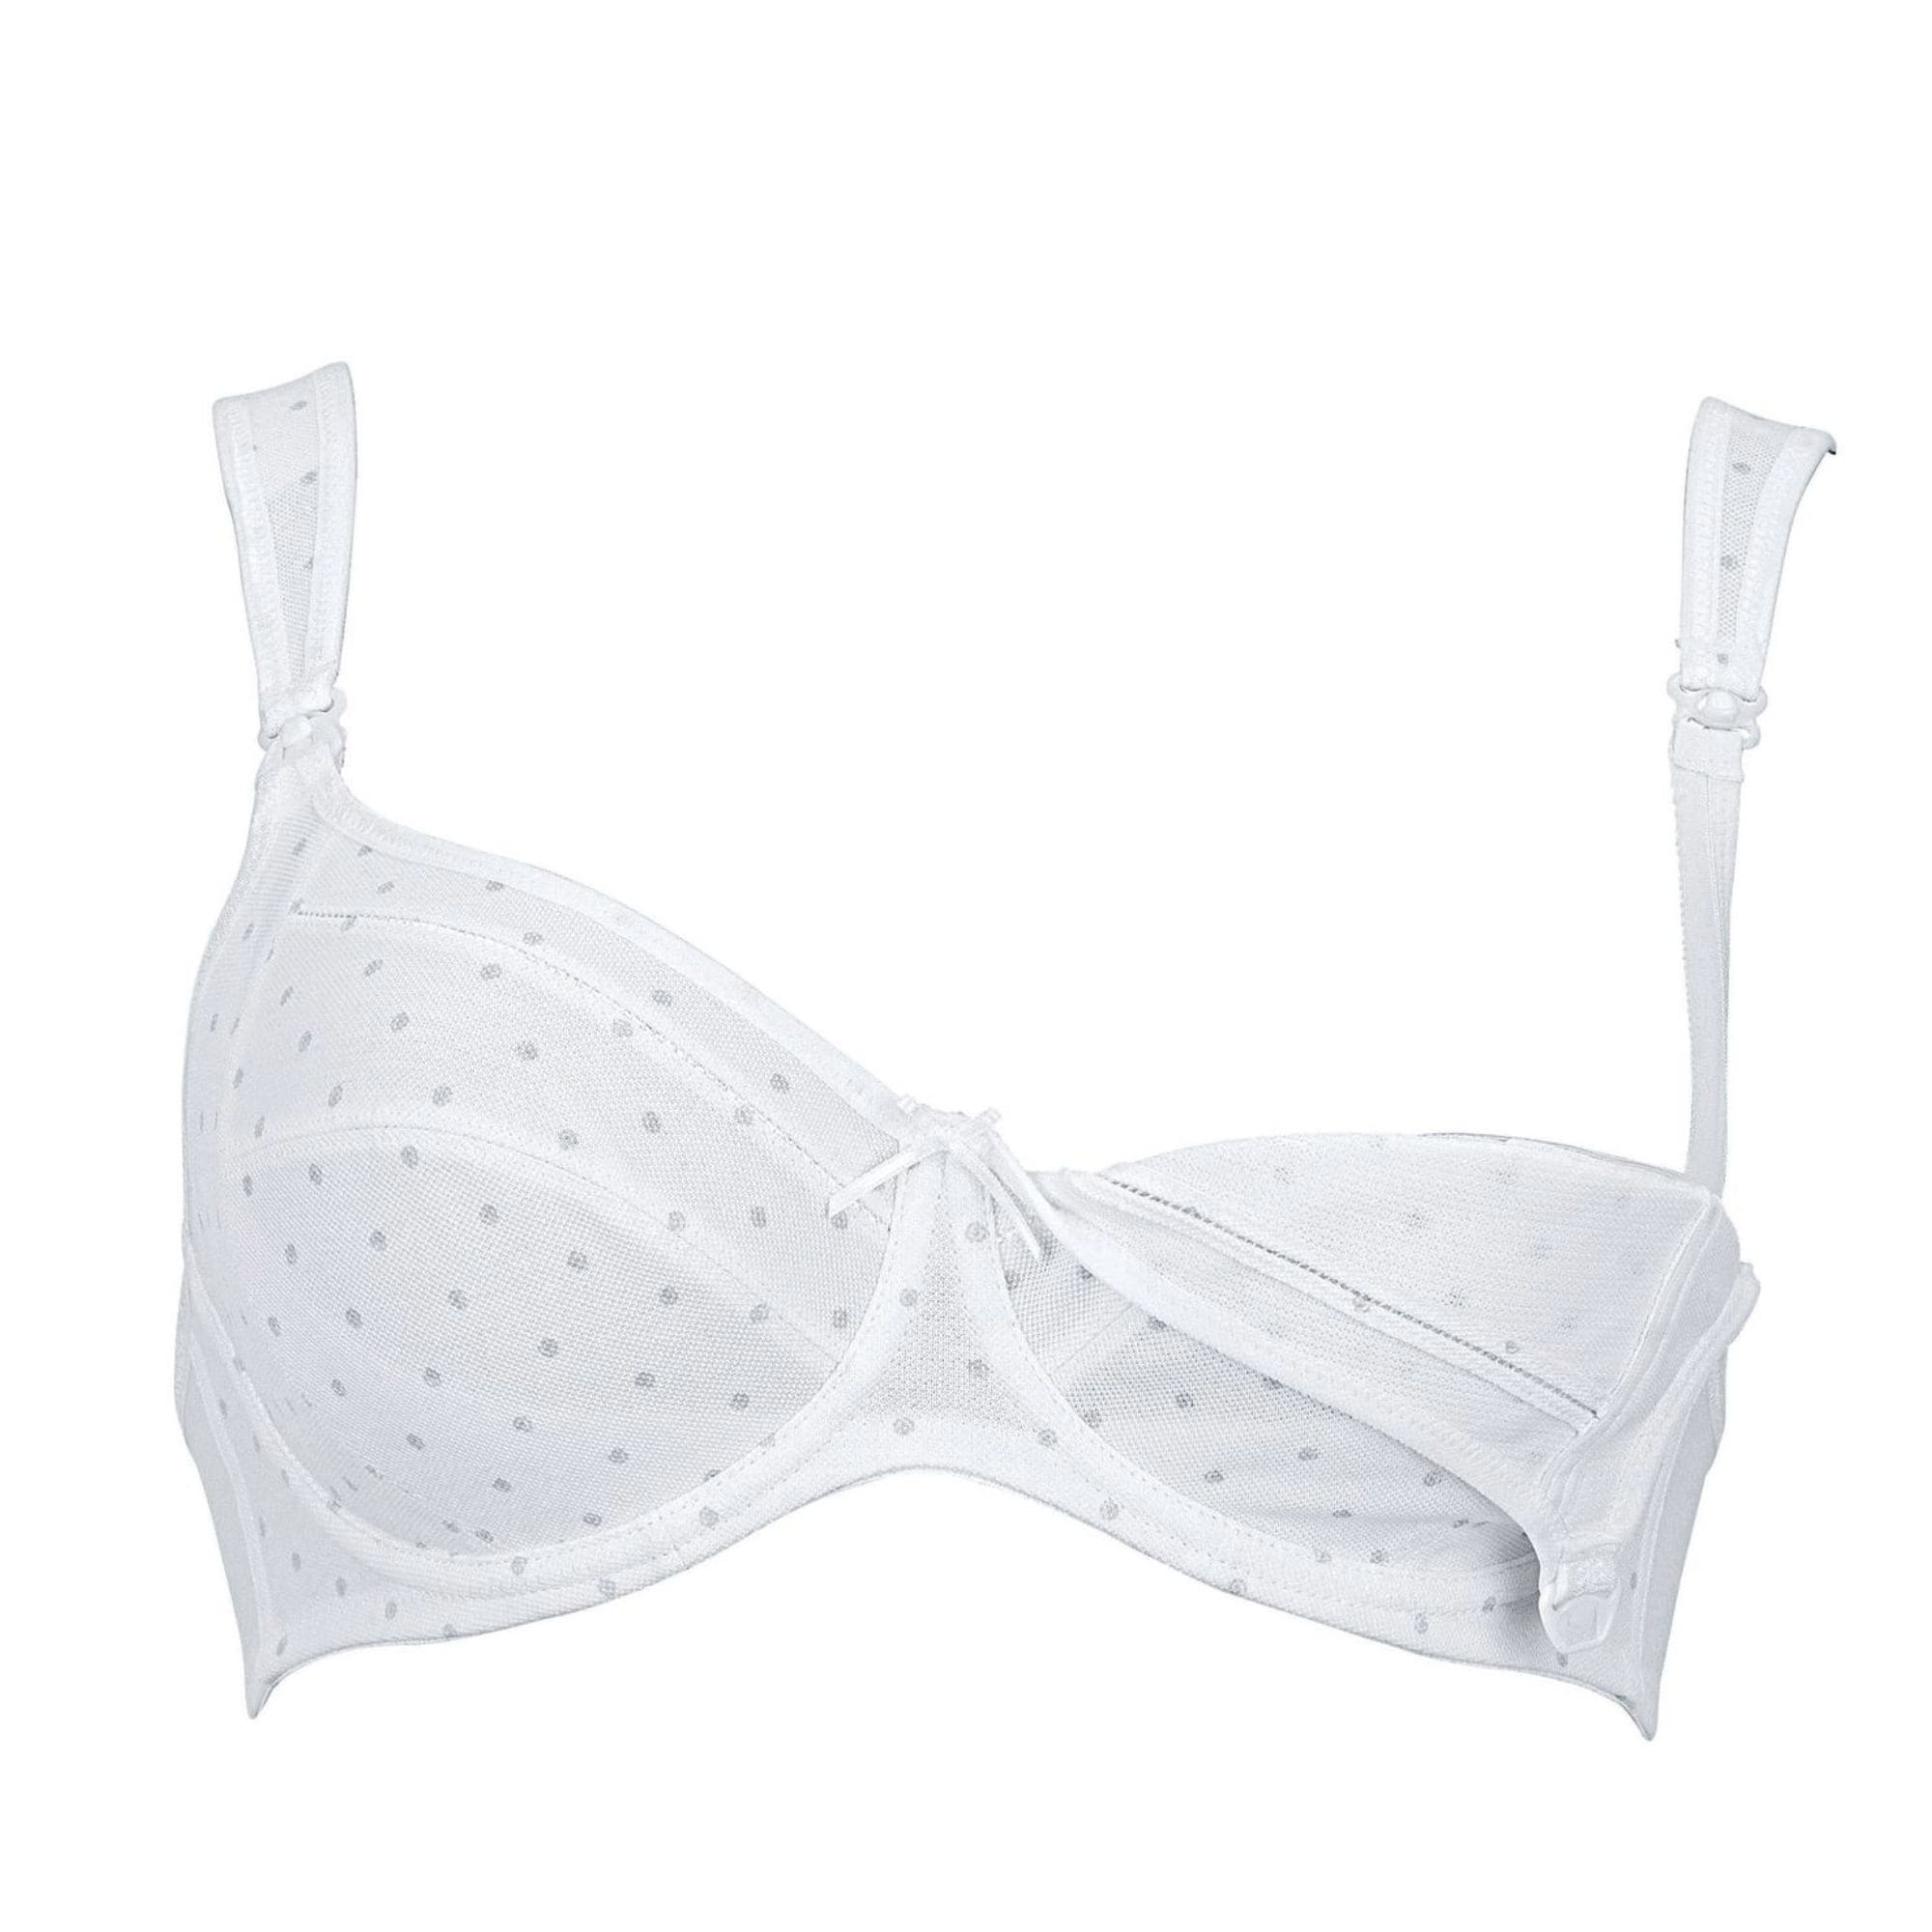 Miss Cotton Amnings-bh Med Bygel Pearl White